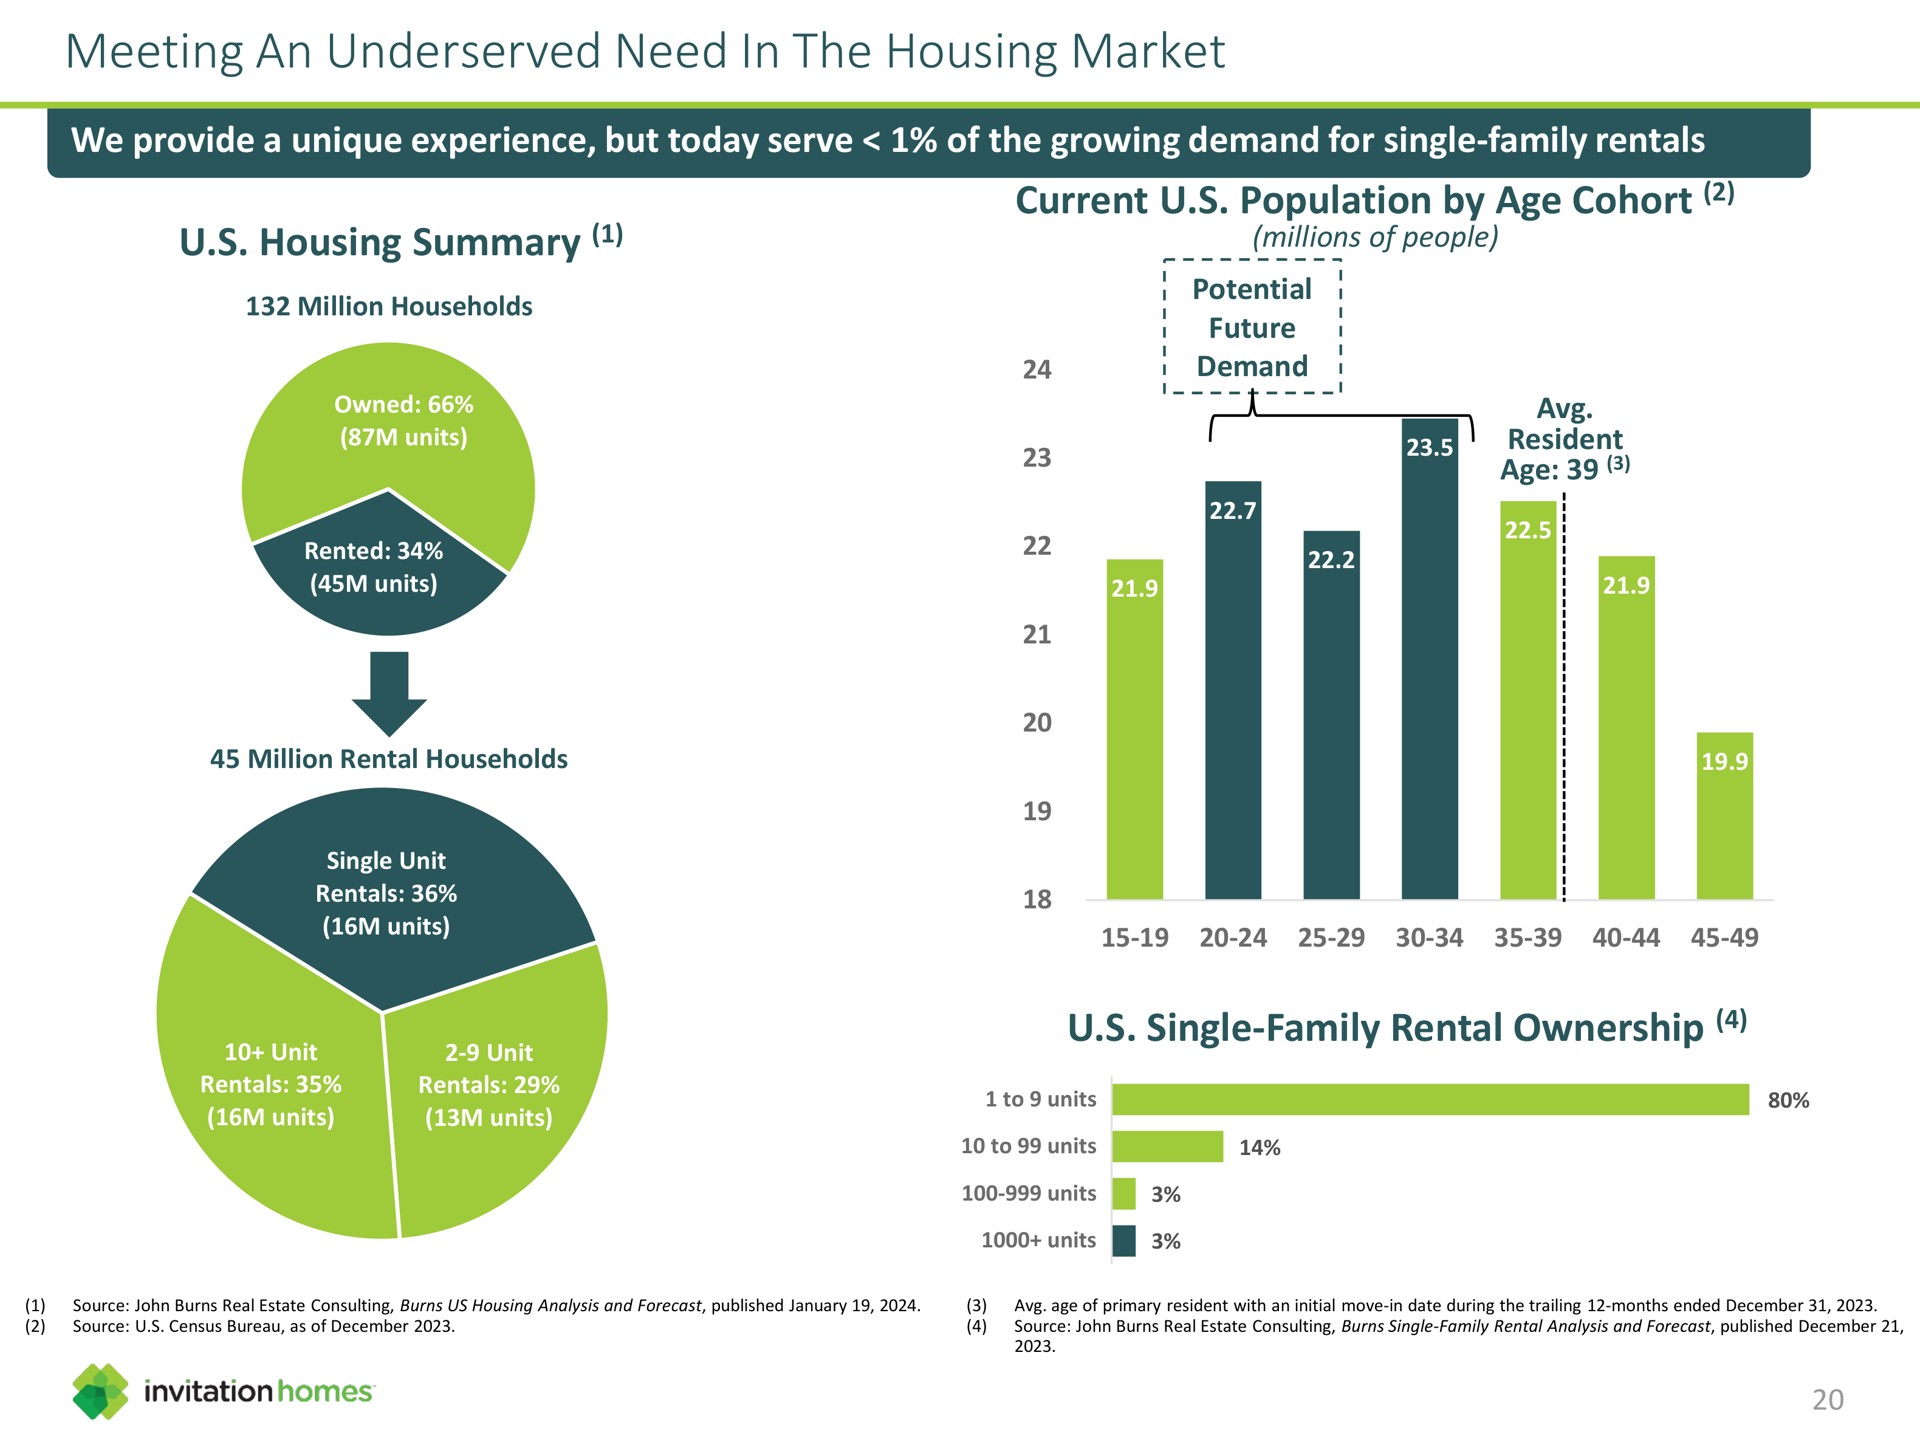 meeting an need in the housing market we provide a unique experience but today serve of the growing demand for single family rentals housing summary current population by age cohort single family rental ownership owned millions people i to units as | Invitation Homes